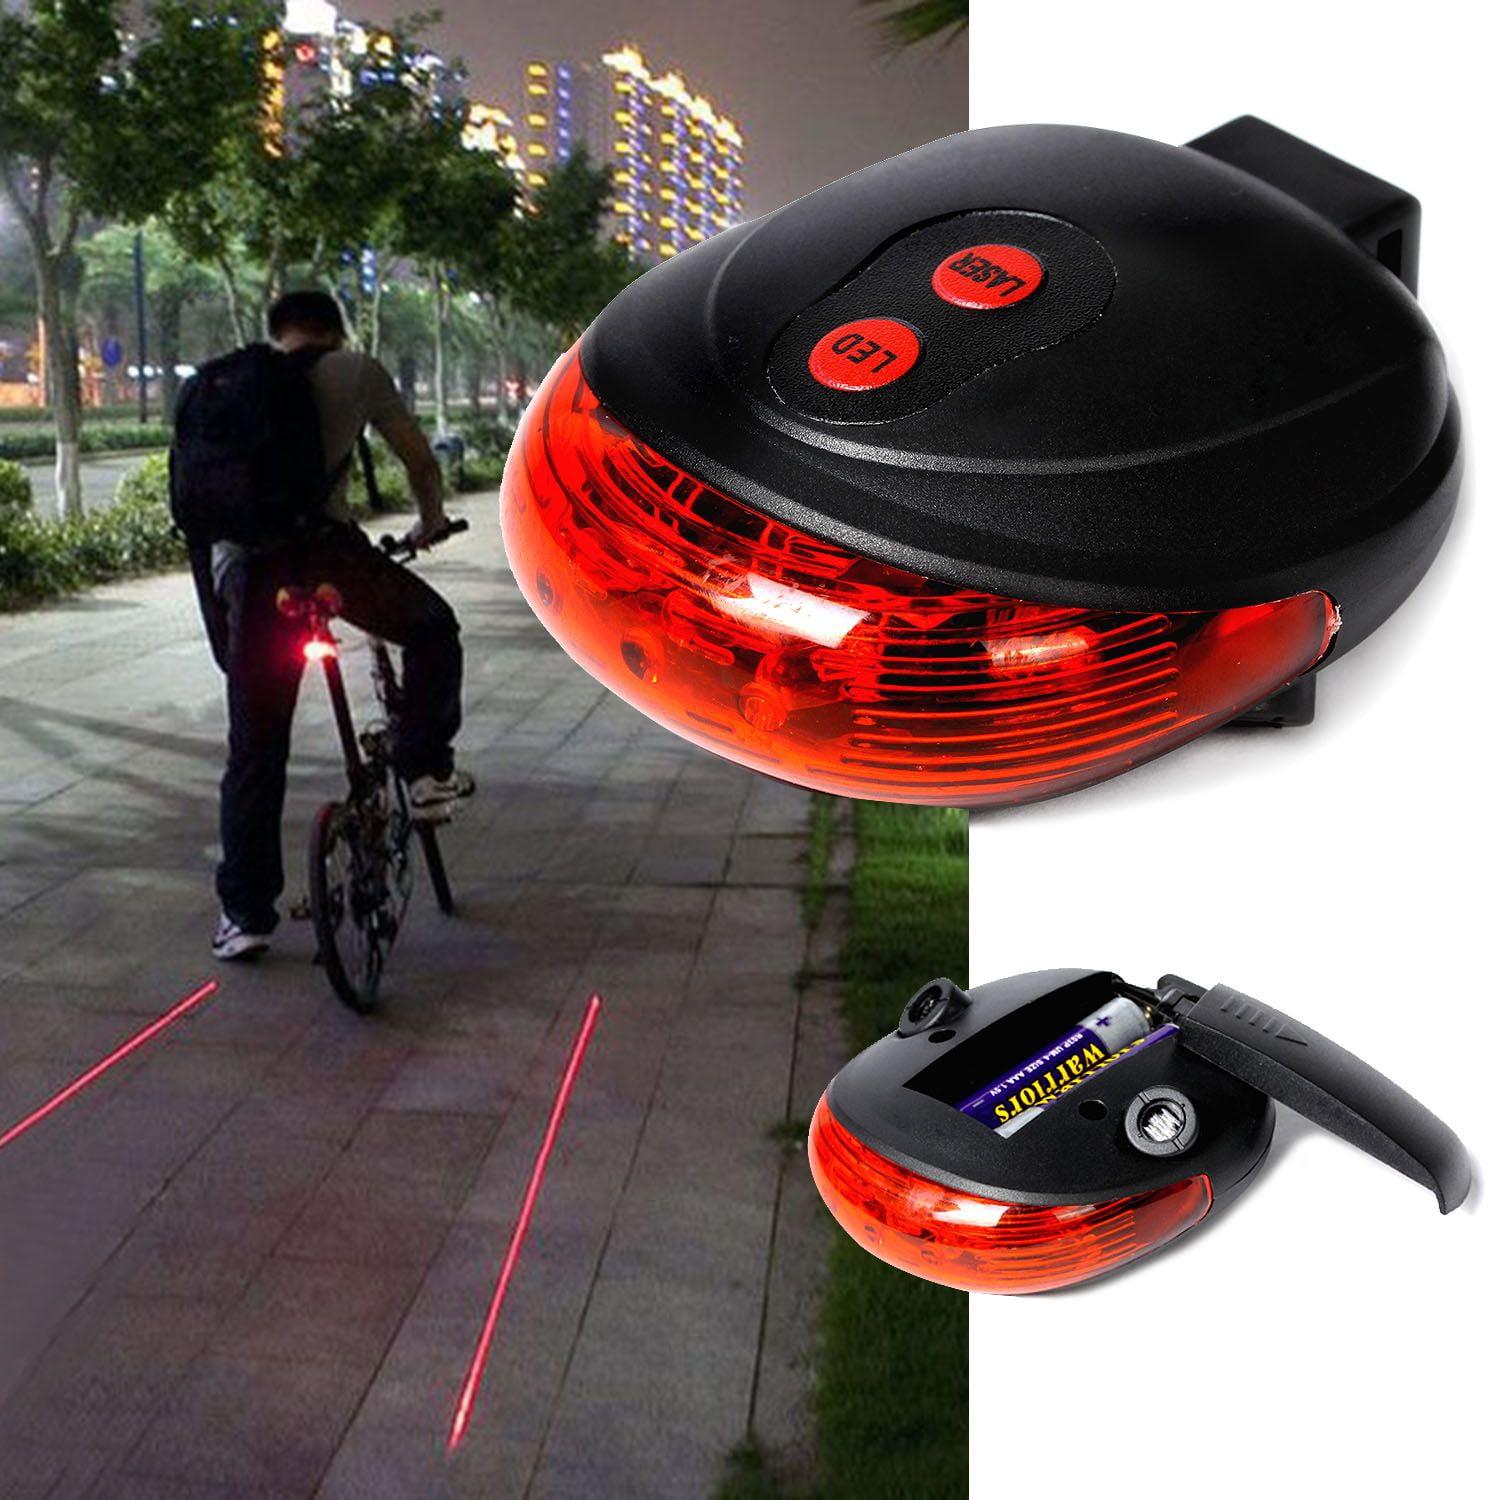 5Led Plastic Tail Rear Safety Flash Light Lamp Red For Bicycle Bike Cycling HOT 